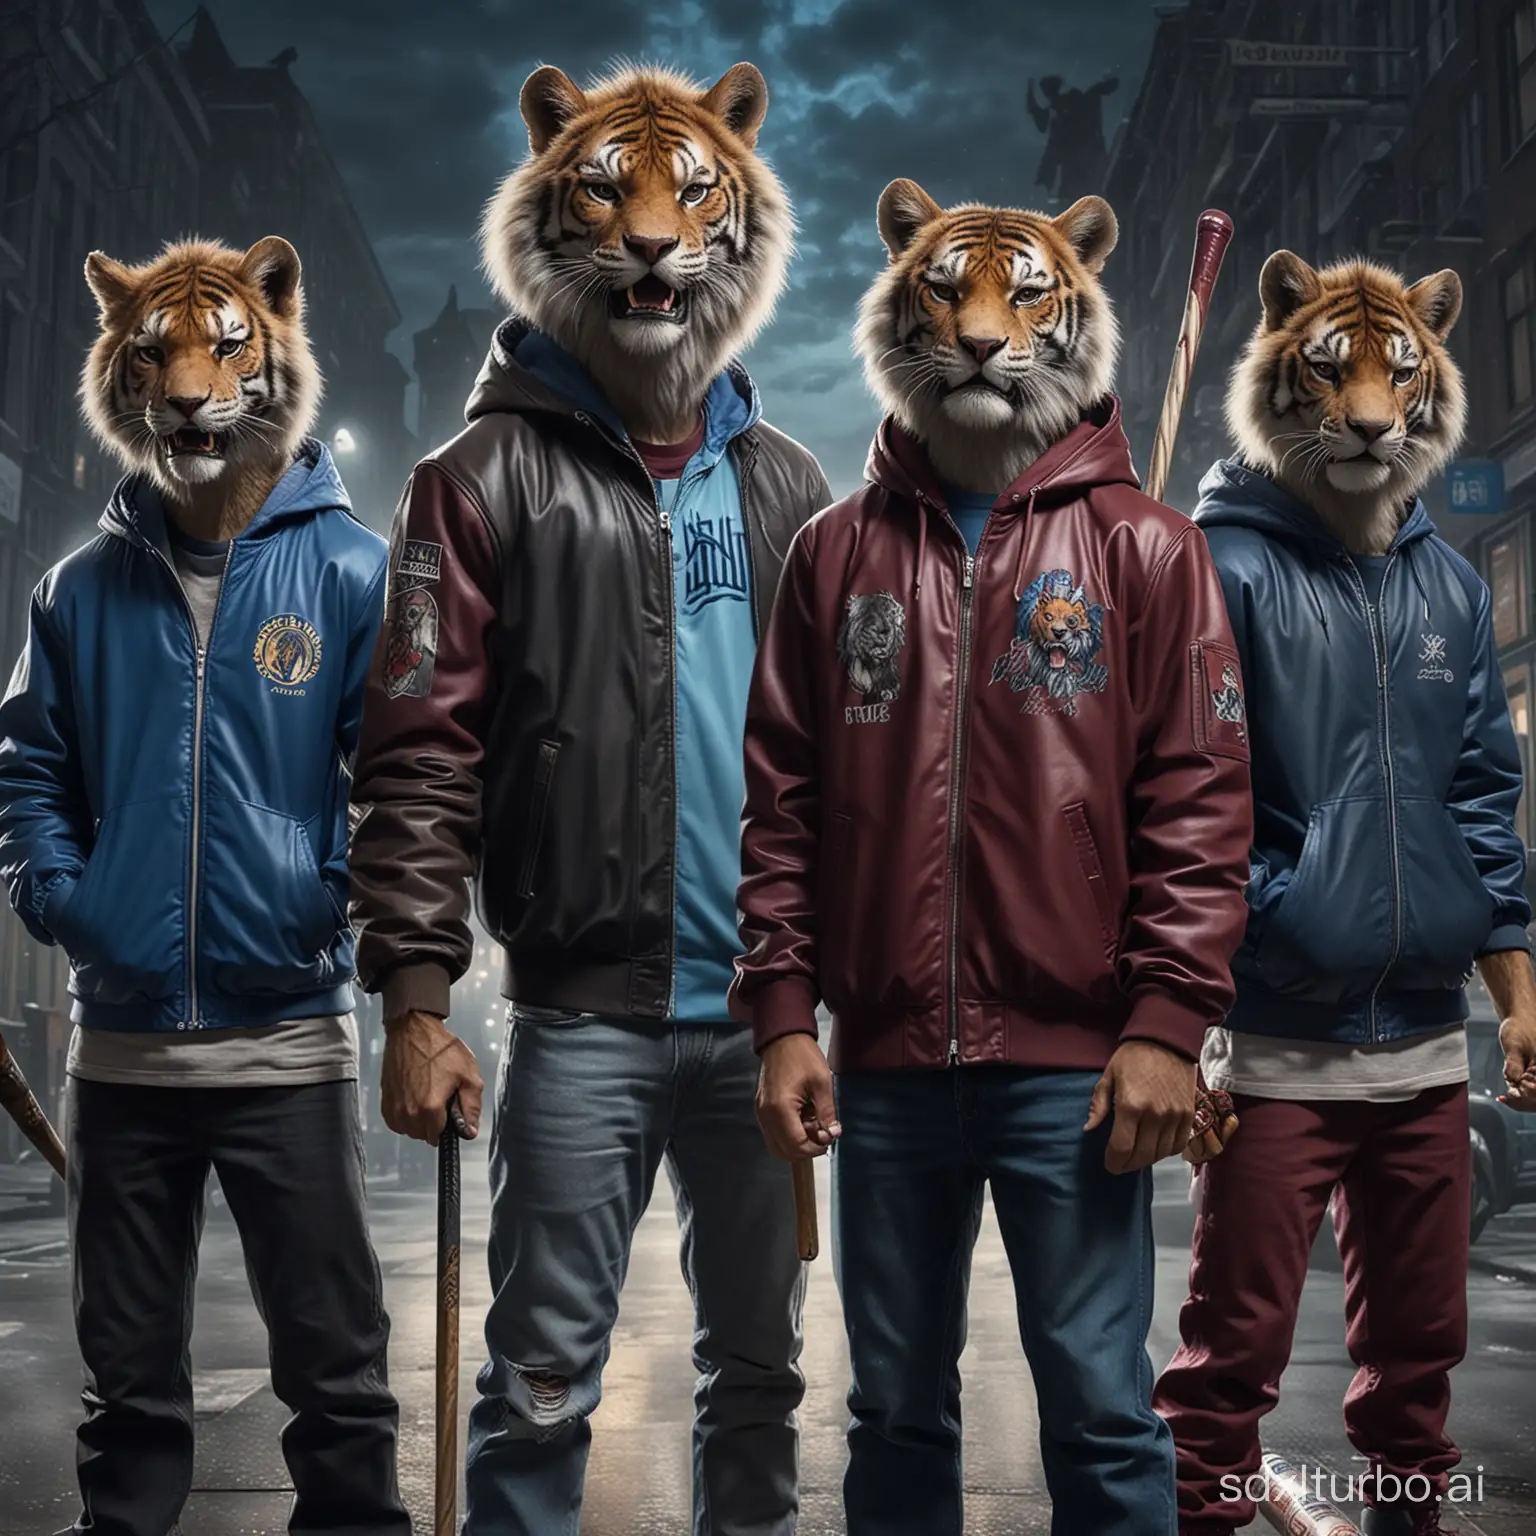 real photo, epic, dynamic pose, 4boys, 3 anthropomorphic furries, 1wolf and 1tiger and 1lion separeted, angry, in black leather jacket, in burgundy and gray windbreaker, in blue sweatshirt, standing russian outside at night, movie poster, with baseball bat in hand, with montage in hand